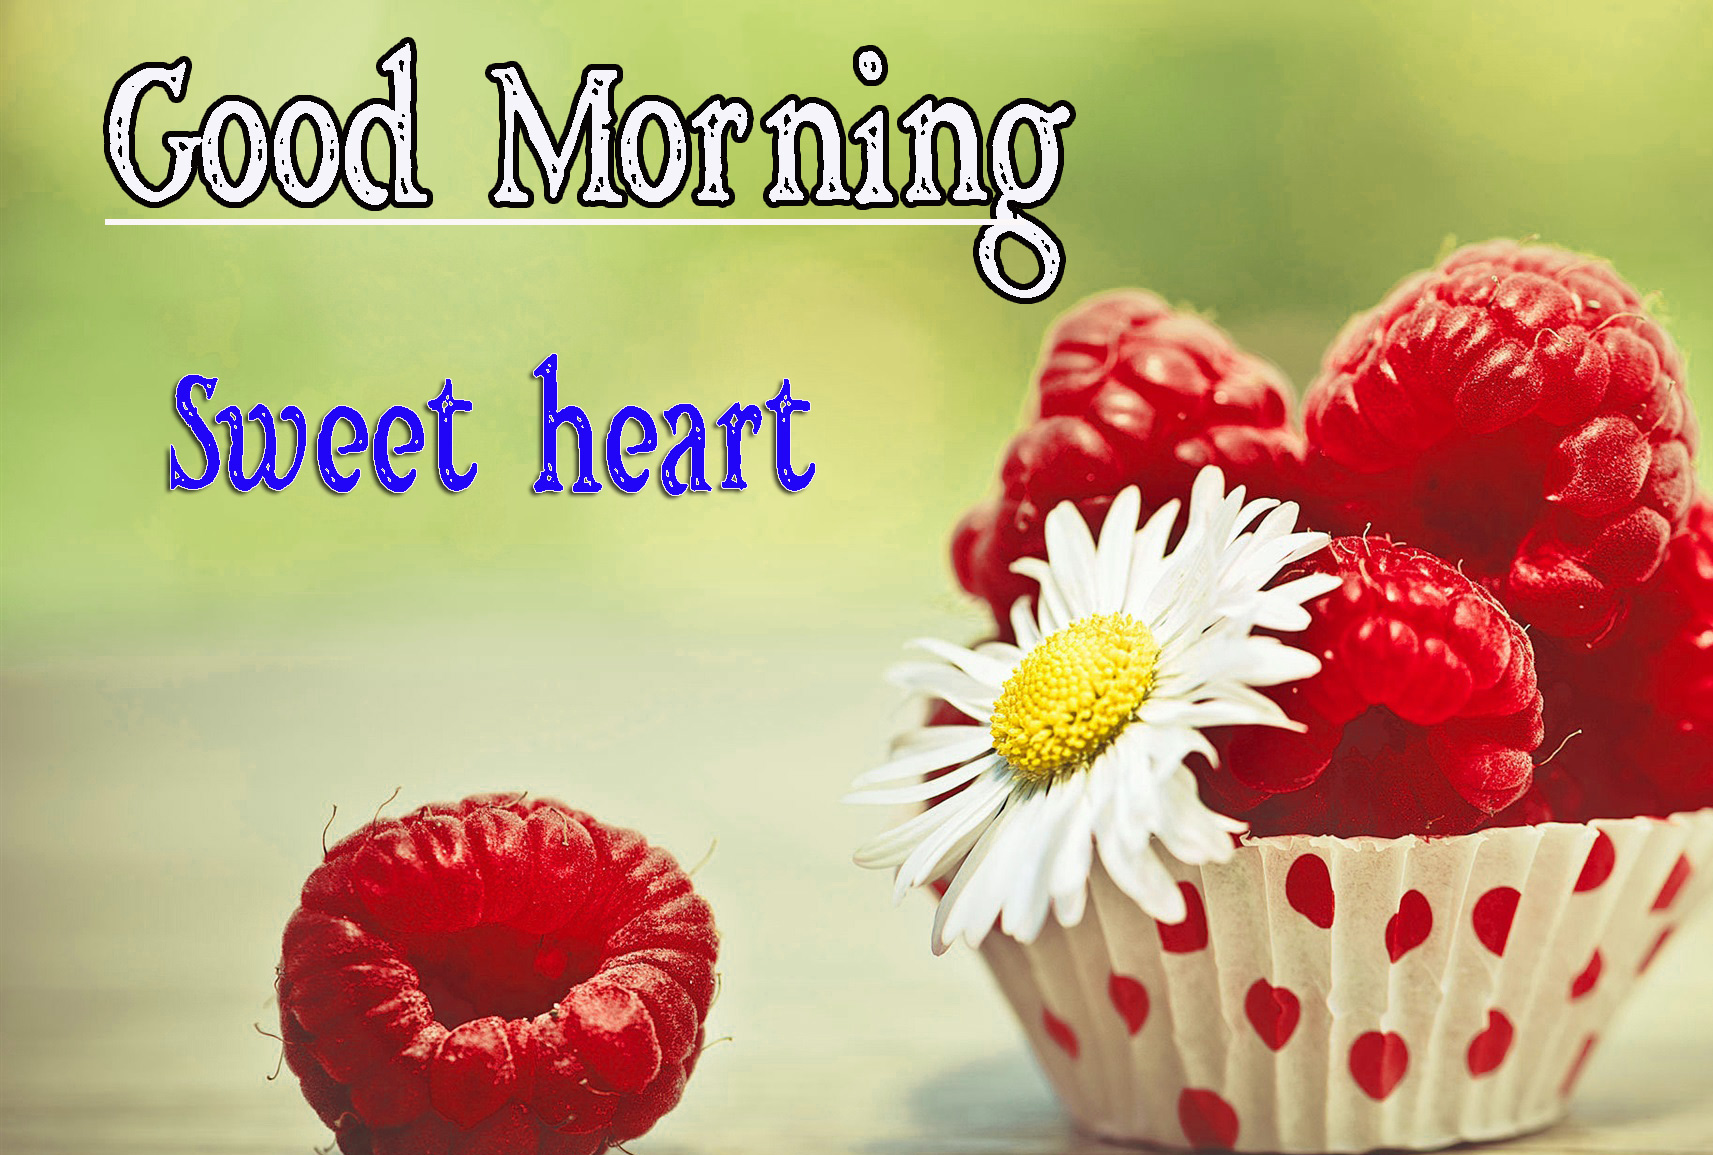 1080p Very Good Morning Images Wallpaper Download 